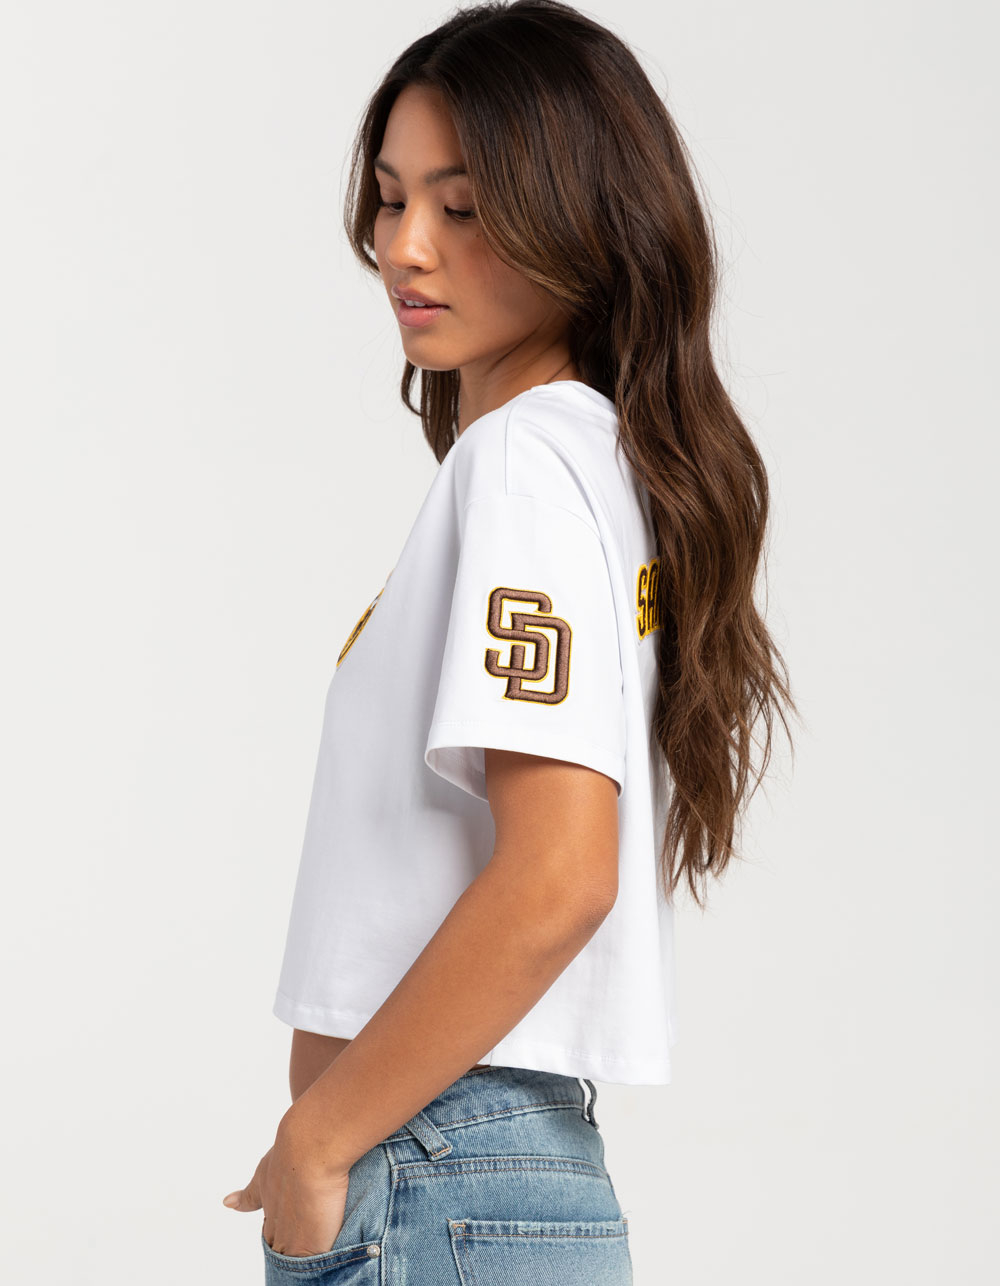 San Diego Padres Women's Apparel, Padres Womens Jerseys, Clothing